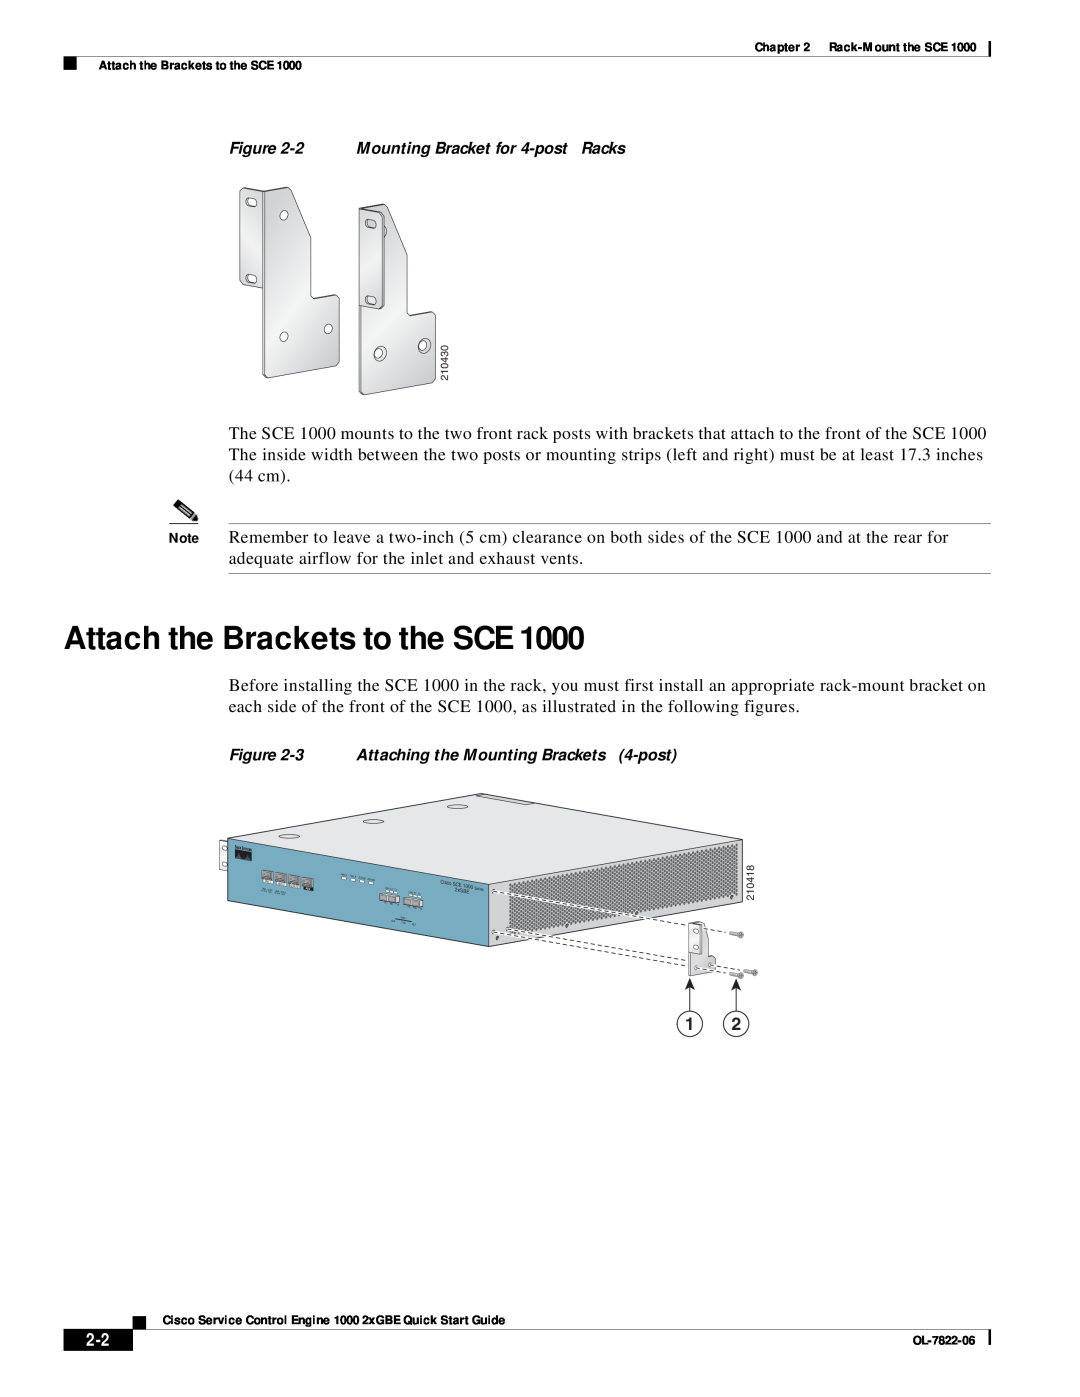 Cisco Systems OL-7822-06 quick start Attach the Brackets to the SCE, Mounting Bracket for 4-post Racks 